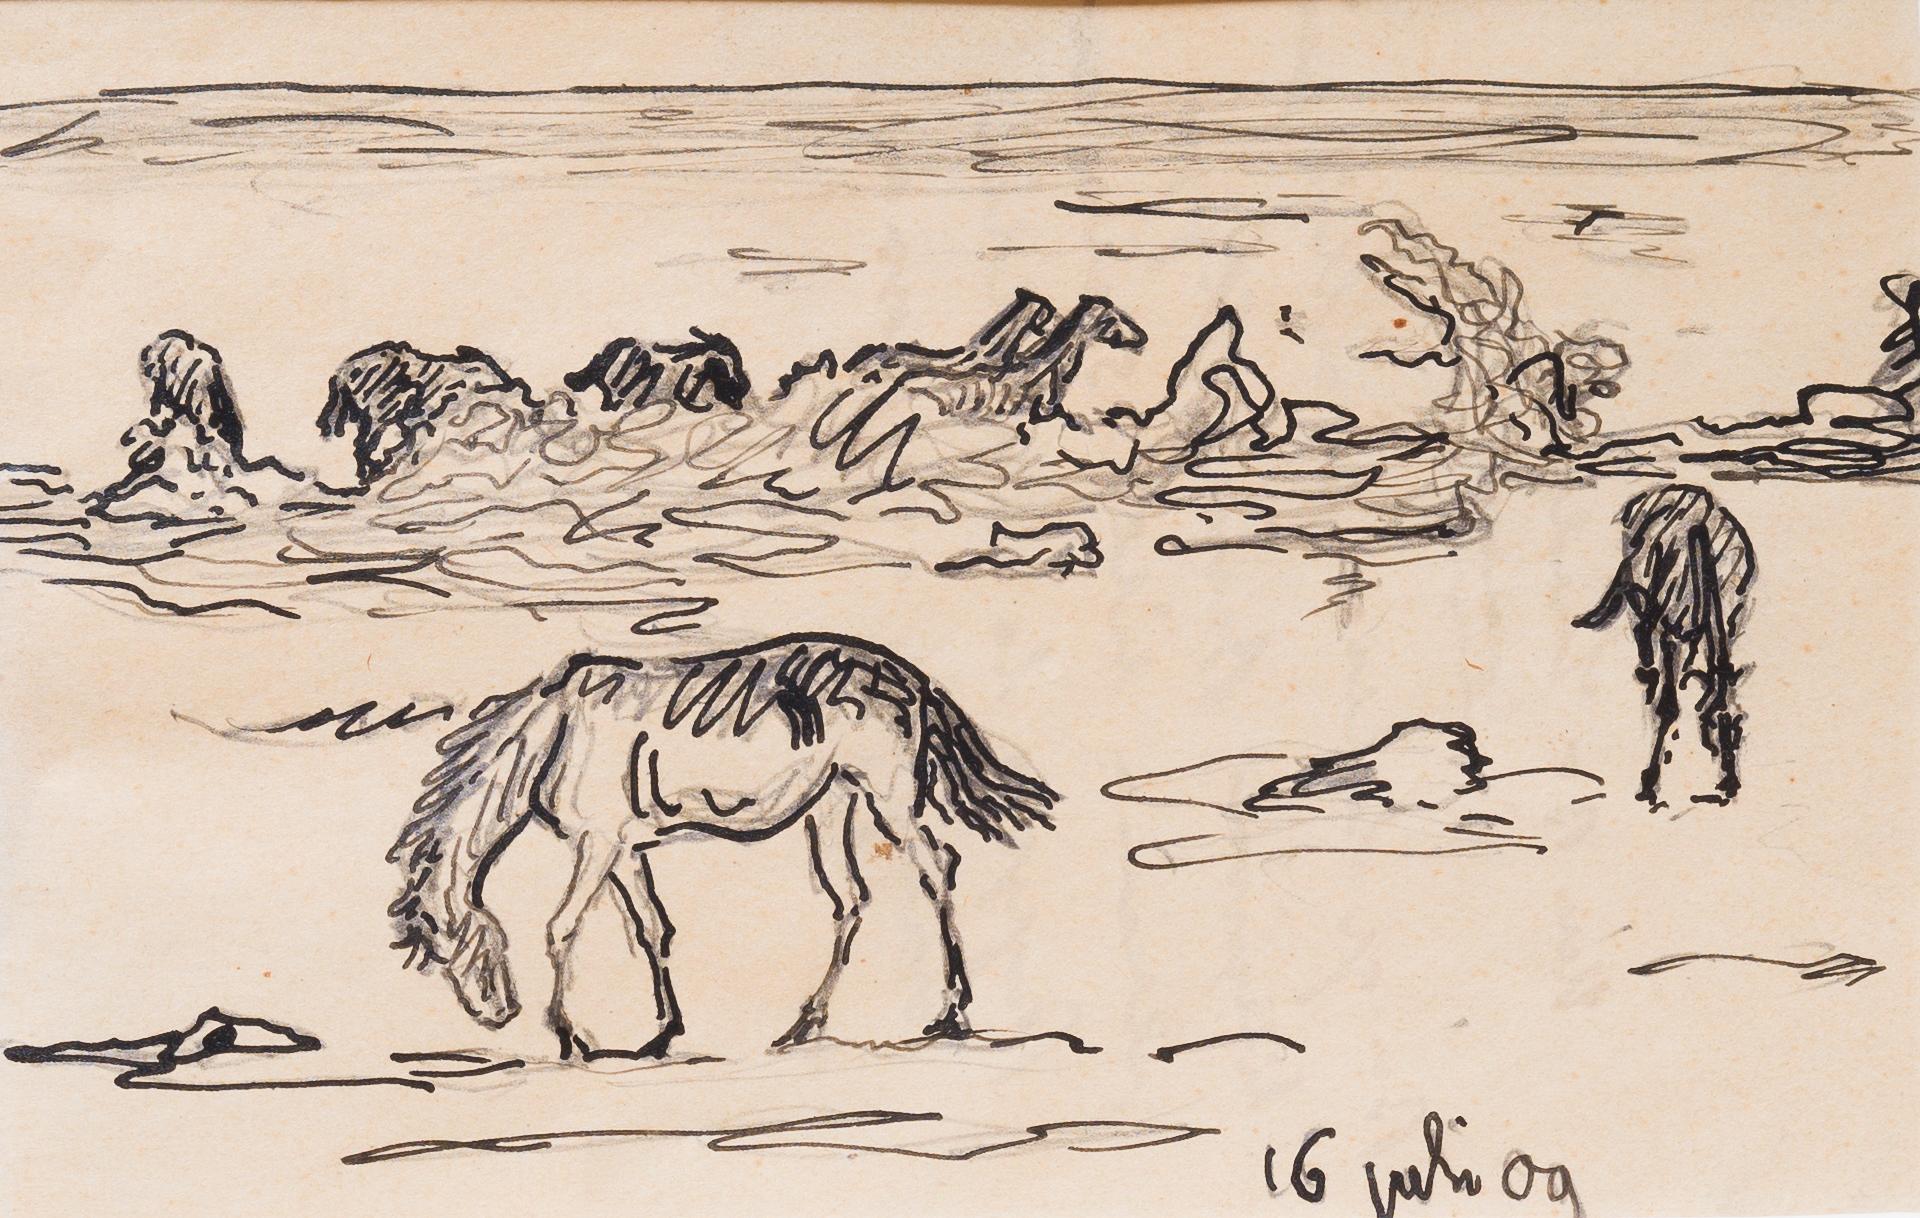 This drawing by Nils Kreuger, created in 1909, captures a serene moment in nature featuring a group of horses, some grazing while others are in motion, set against a backdrop of water and wind-swept trees. Kreuger, born on October 11, 1858, in